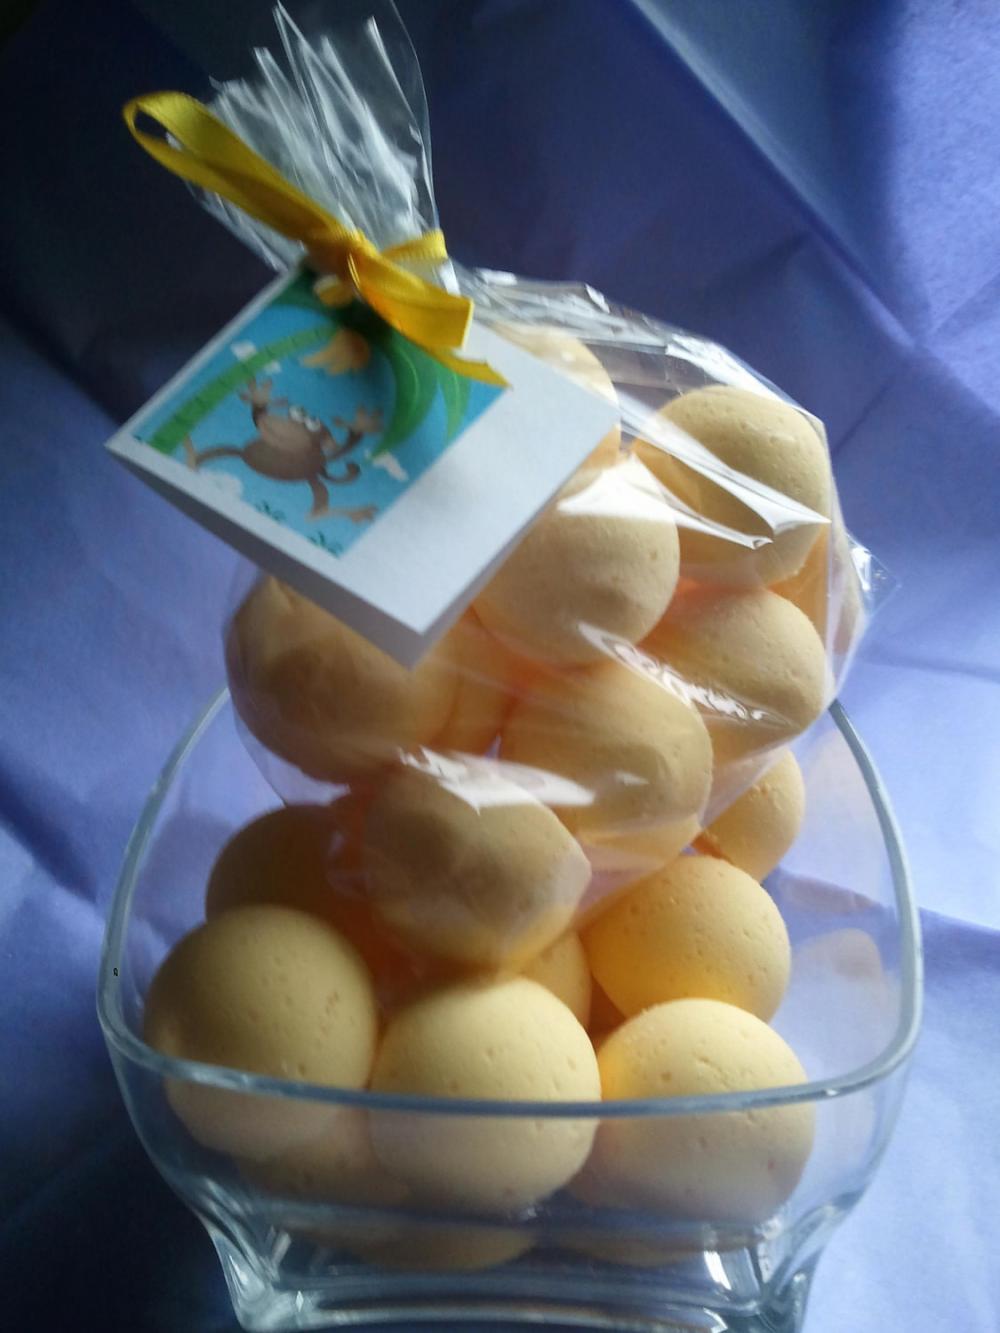 12 Bath Bombs 1 Oz Each (monkey Farts) Gift Bag Bath Fizzies, Great For Kids...and Adults Too